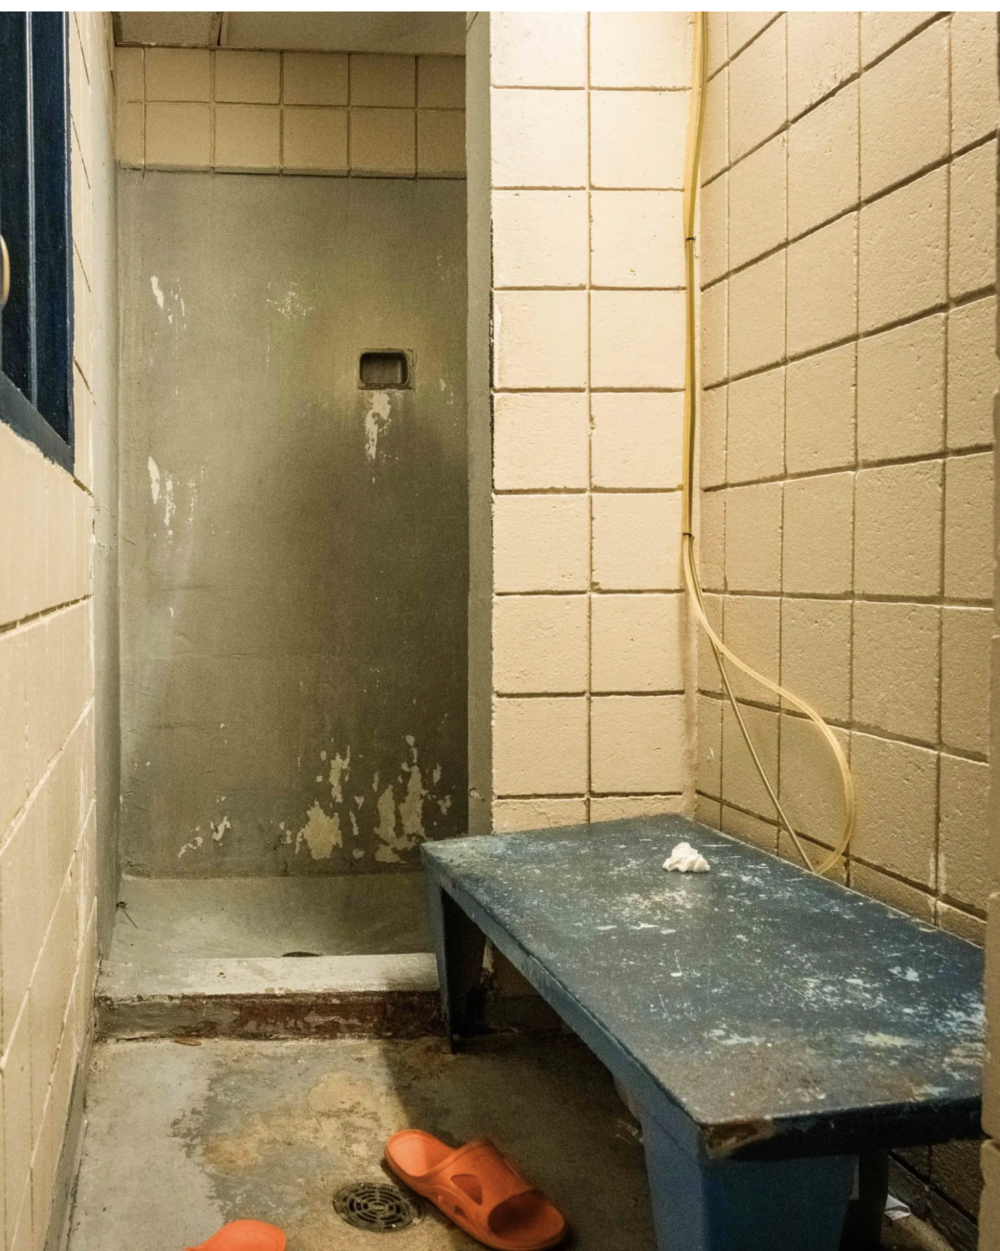 A shower at the Camden County Jail, April 11, 2024, in Camden County, GA.